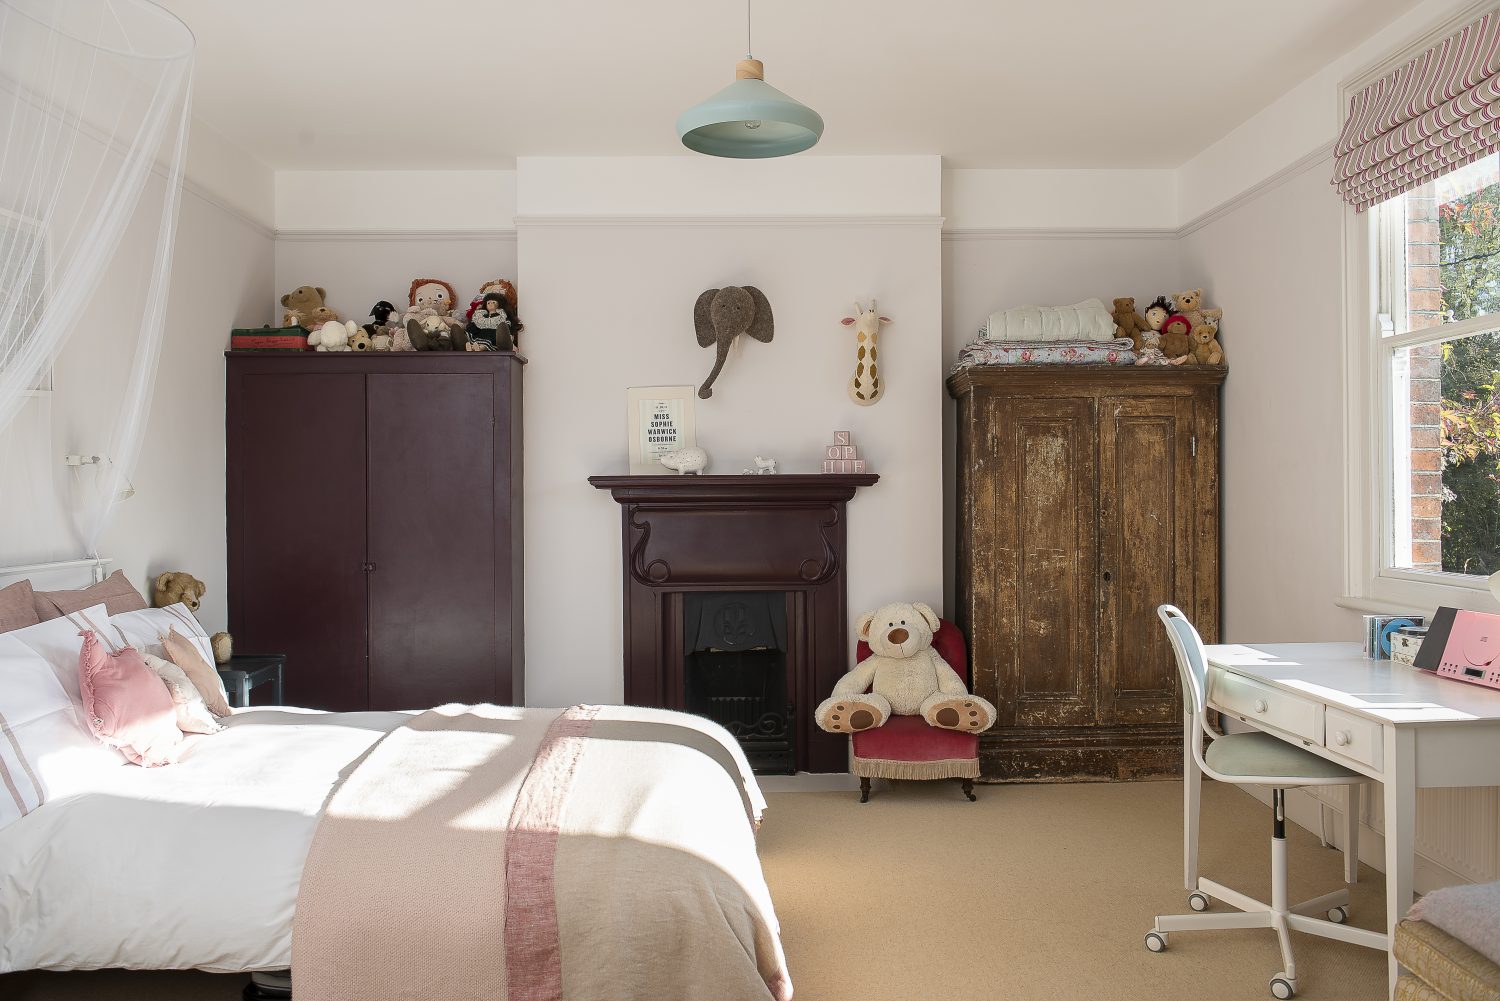 Toby and Megan’s daughter’s room has a built-in wardrobe and an original Arts and Crafts fireplace. Both are painted in Farrow & Ball’s Brinjal, which works beautifully with the soft pinks in this delightful bedroom